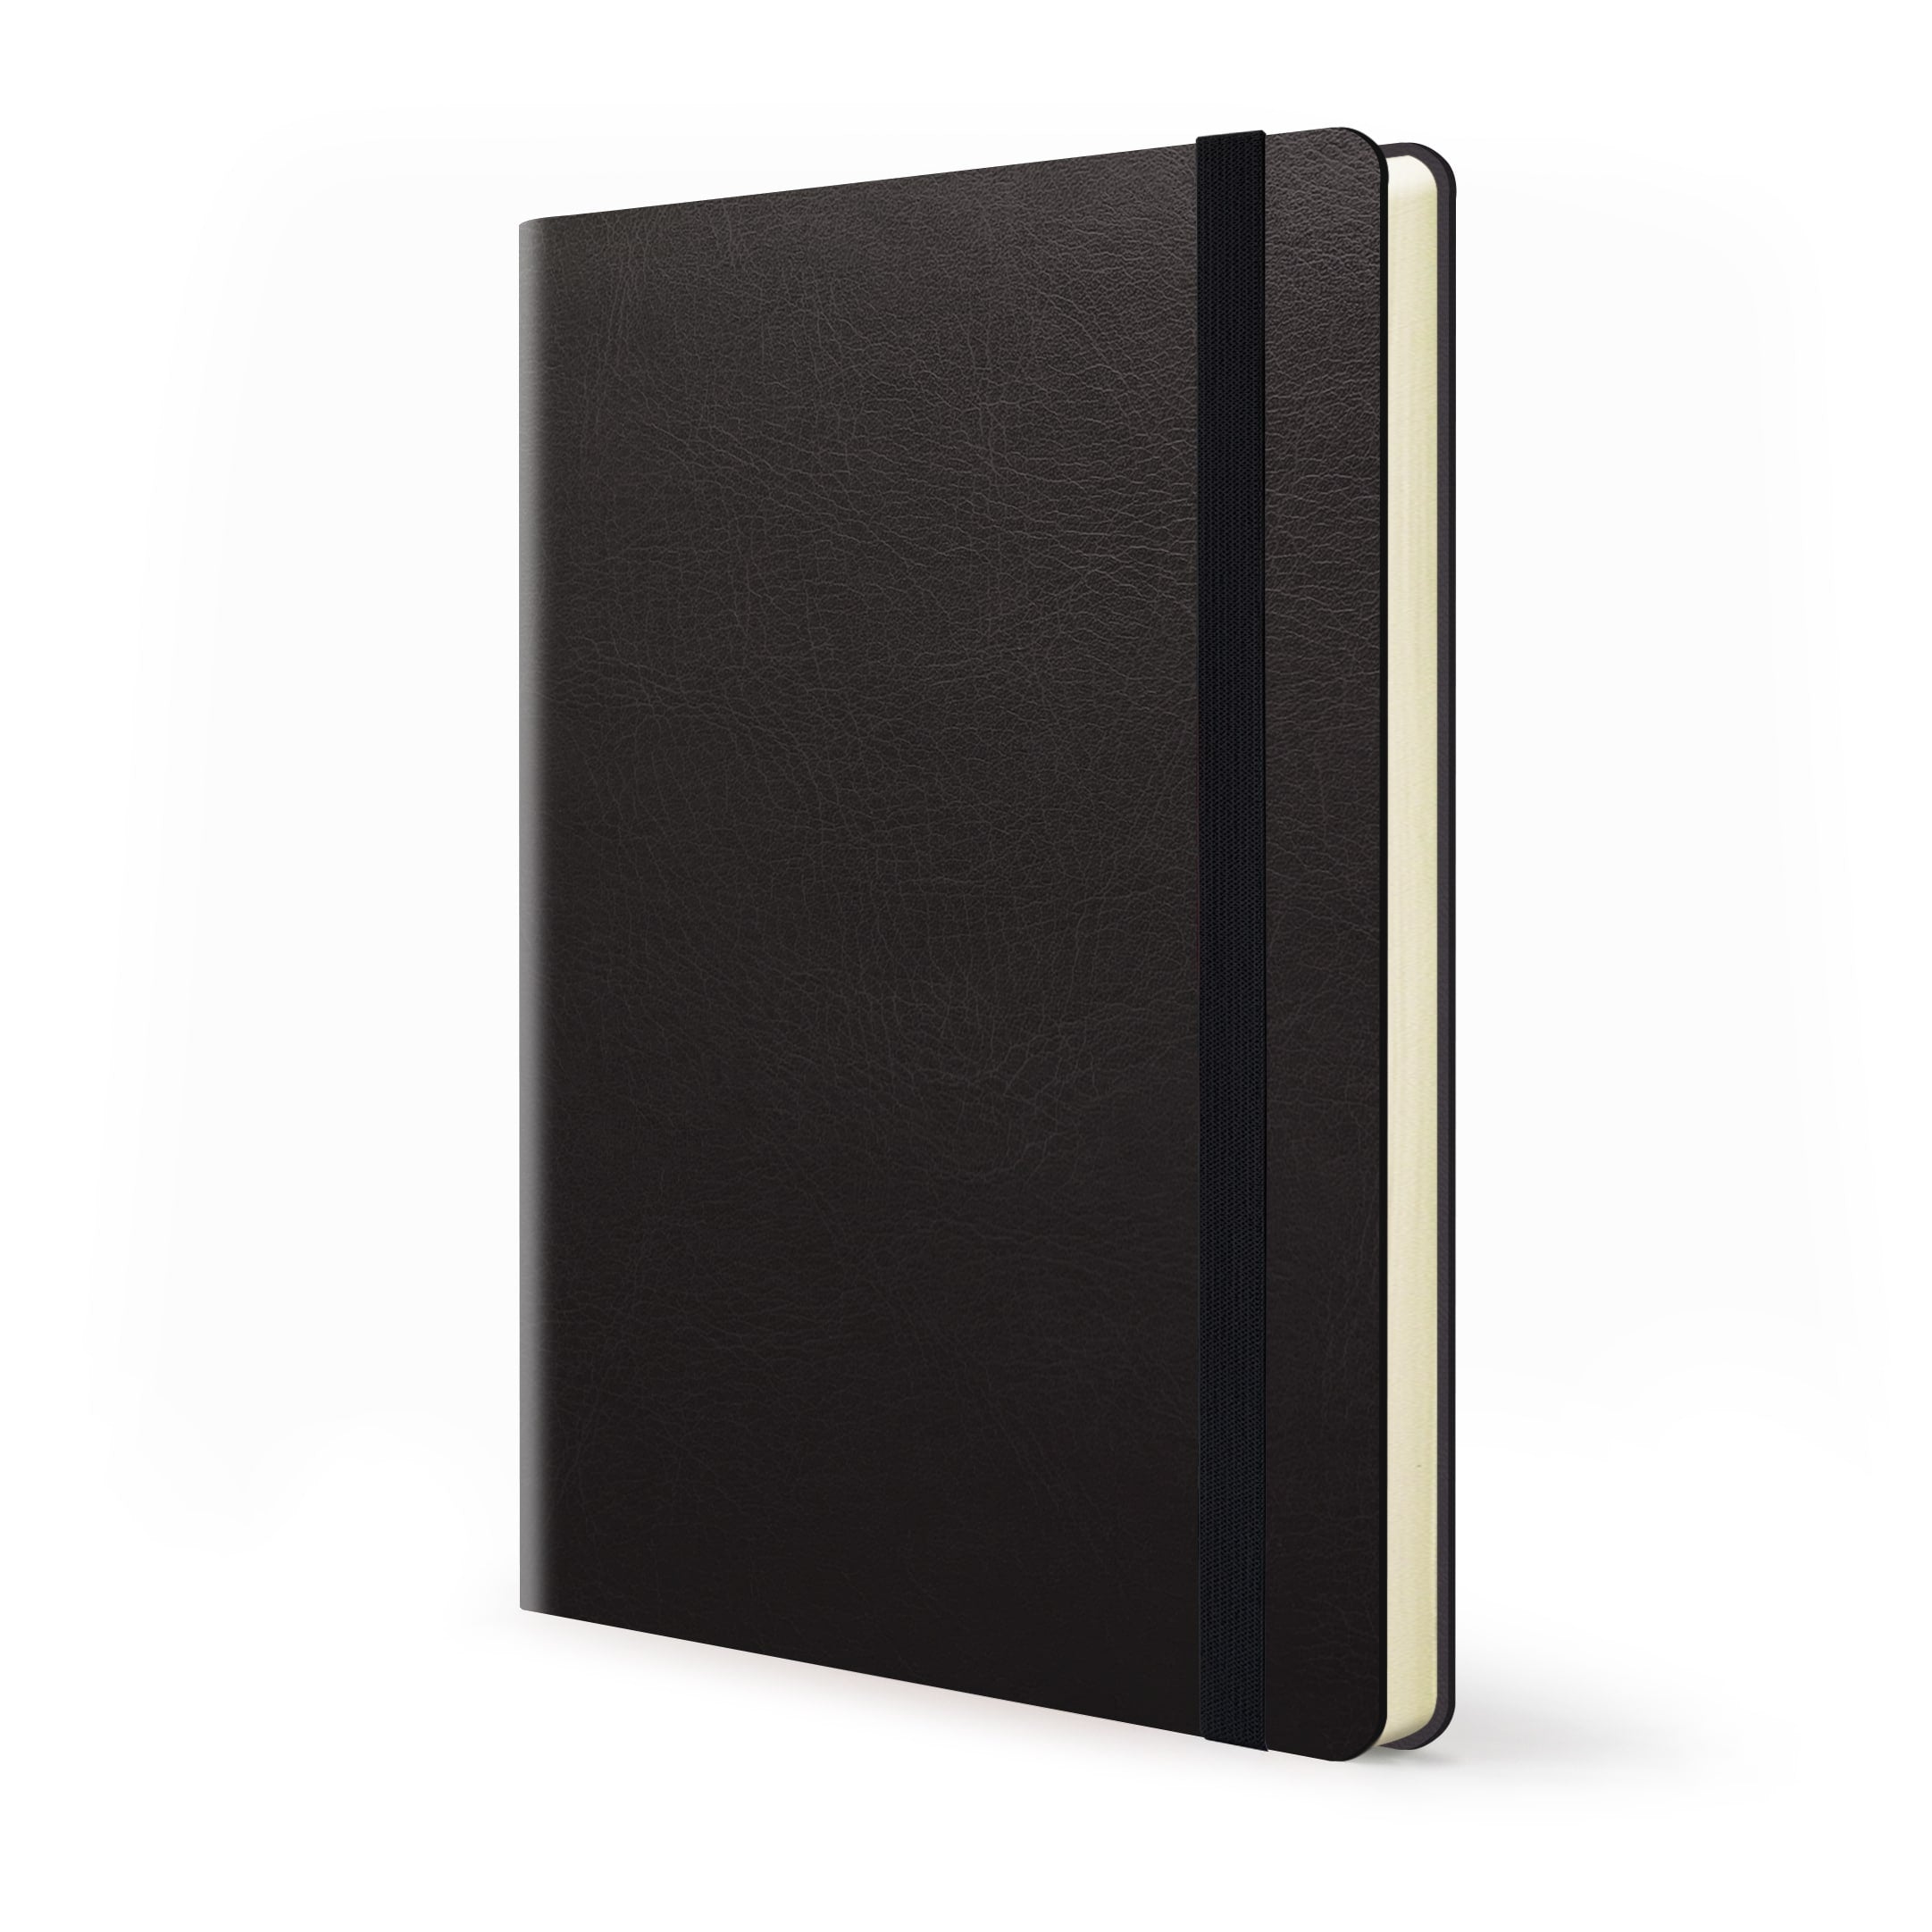 Image shows a black Flexi softcover journal